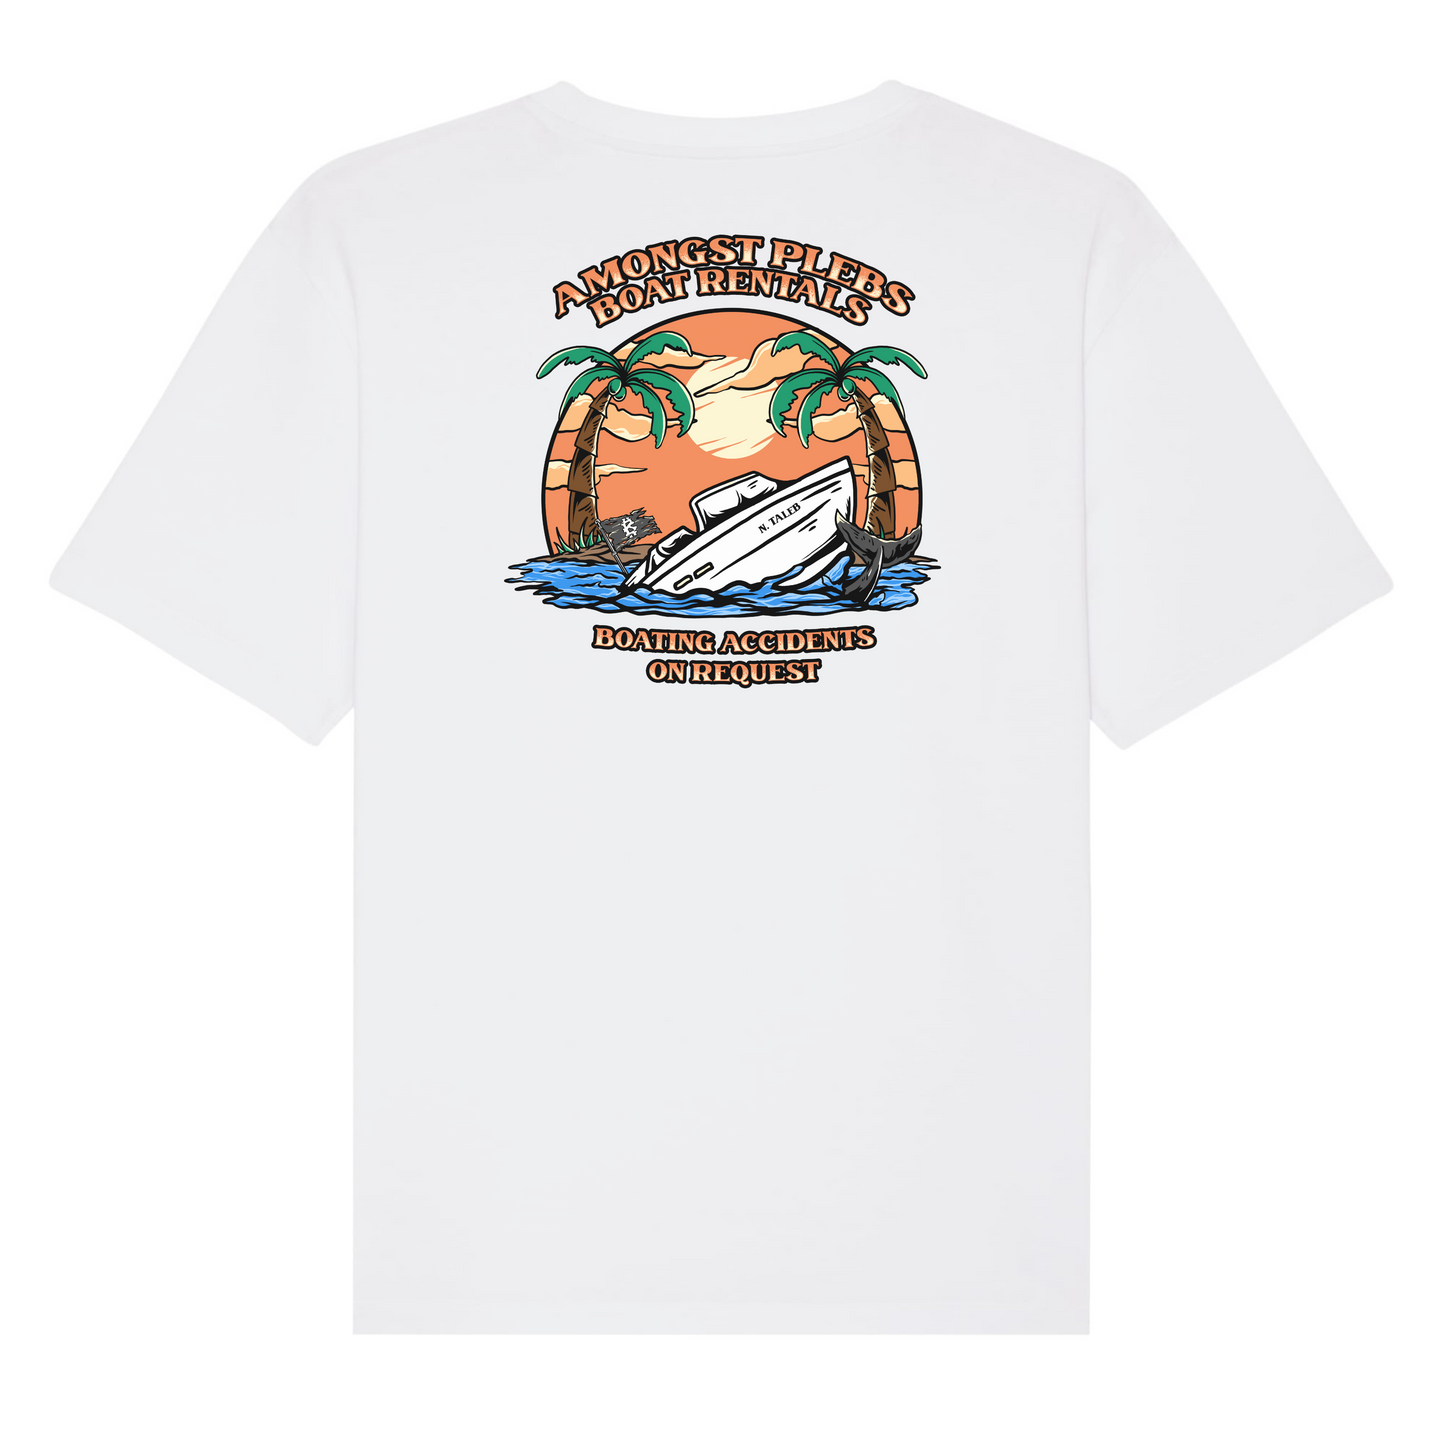 Bitcoin T-Shirt Boating Accidents